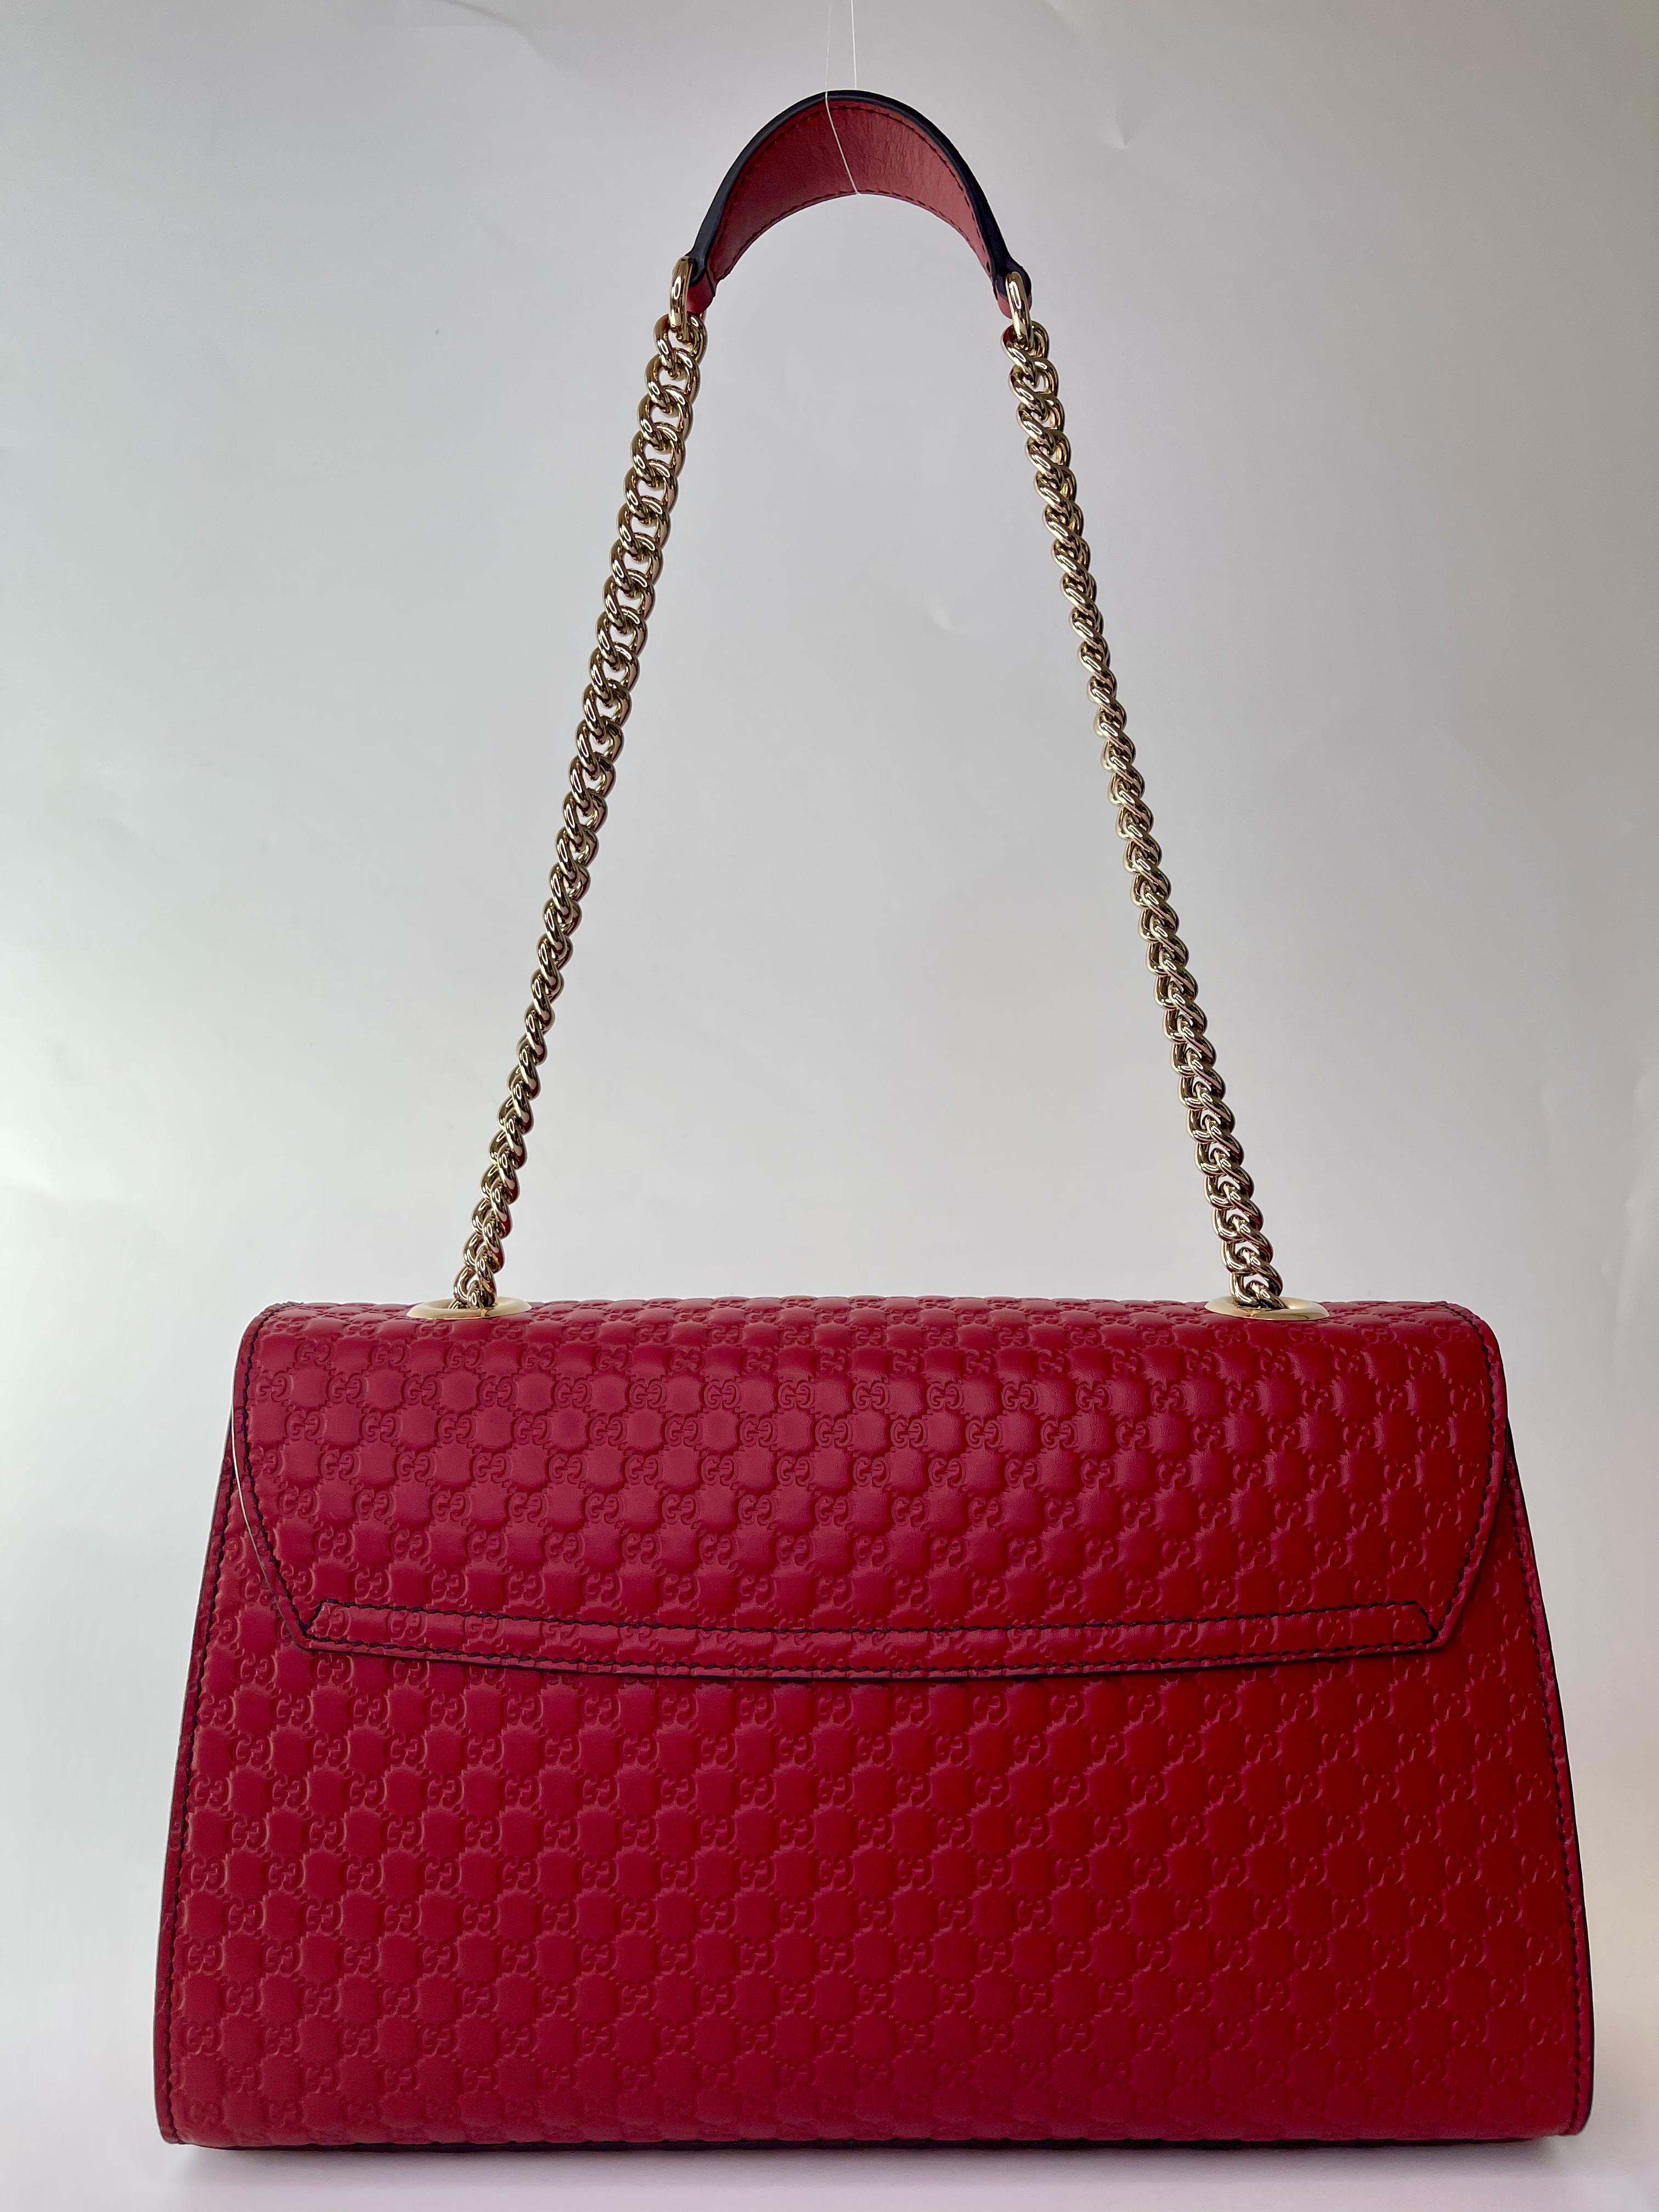 This Shoulder is made of fine Gucci GG monogram embossed leather in a deep red, featuring a light gold chain link shoulder strap with a leather shoulder pad and a crossover flap secured with a strap adorned with leather tassels and a gold horse bit